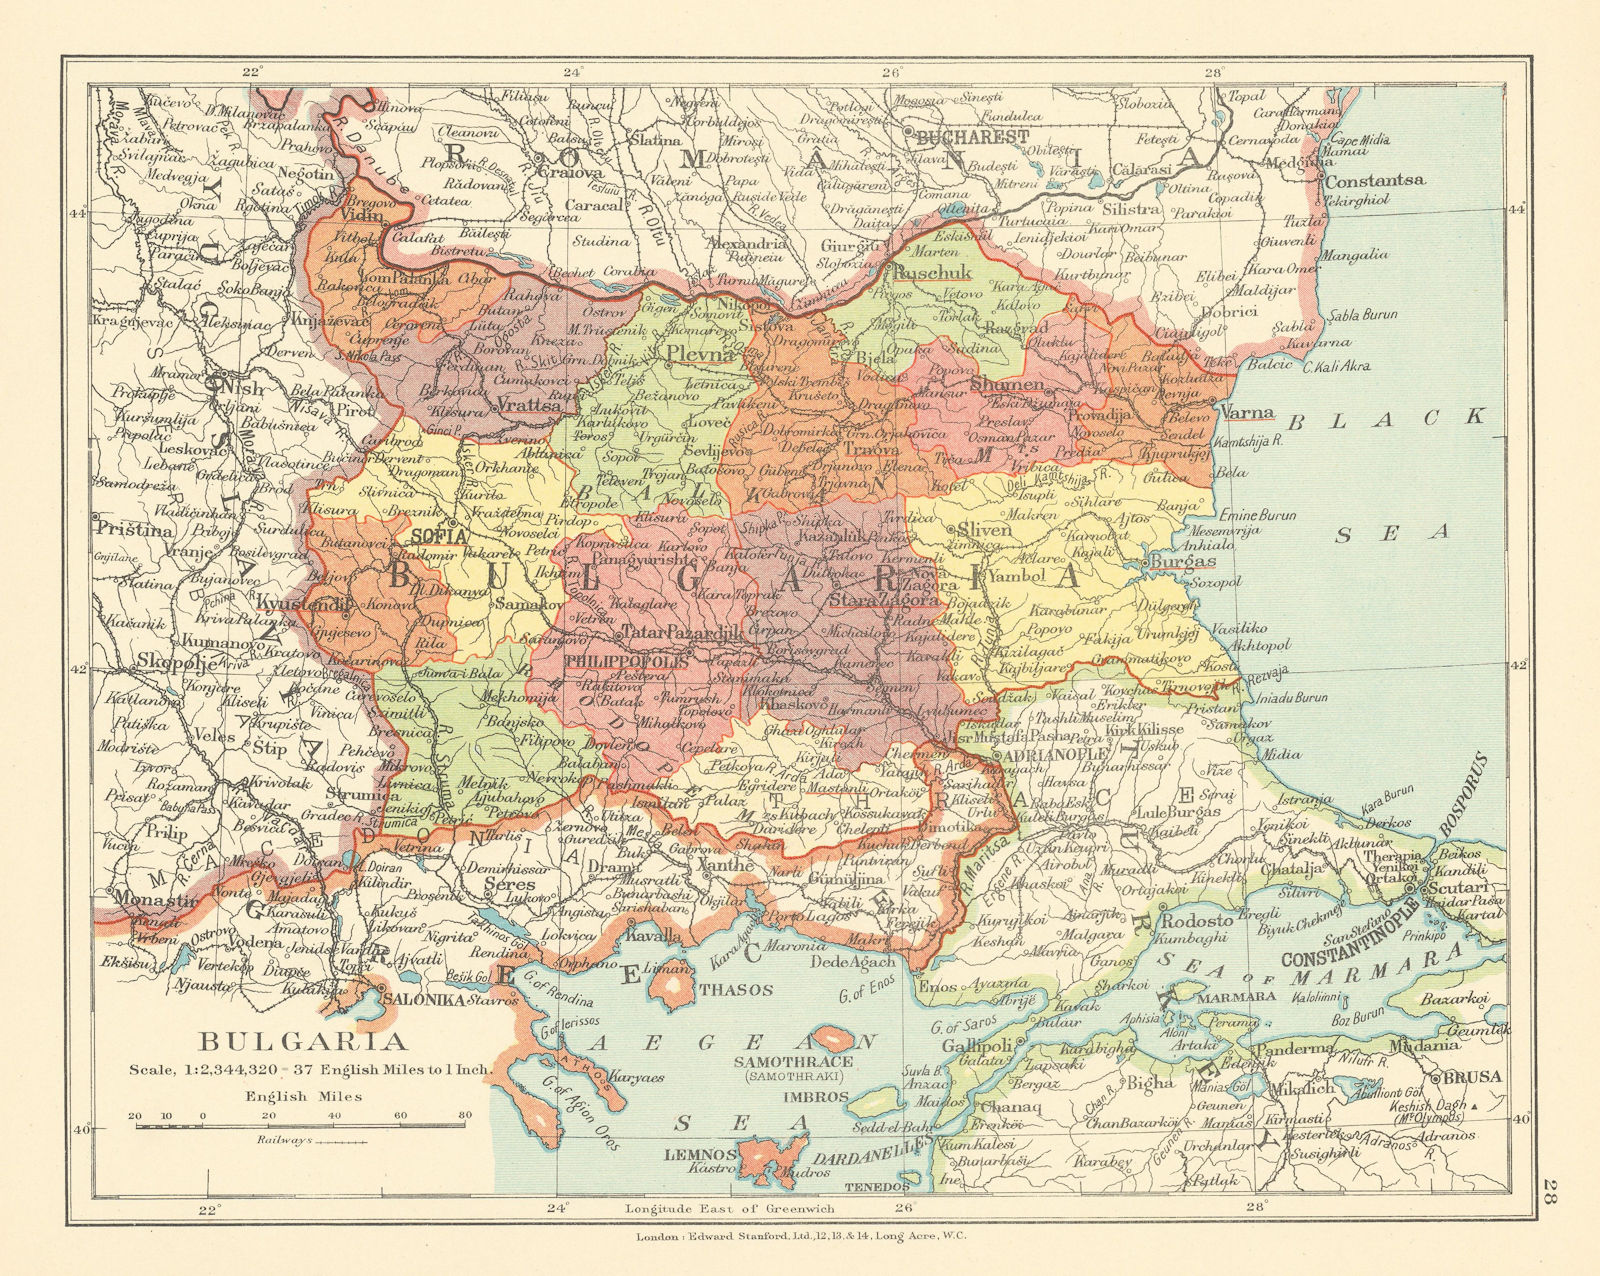 Associate Product Bulgaria in Provinces. Thrace. European Turkey. STANFORD c1925 old vintage map